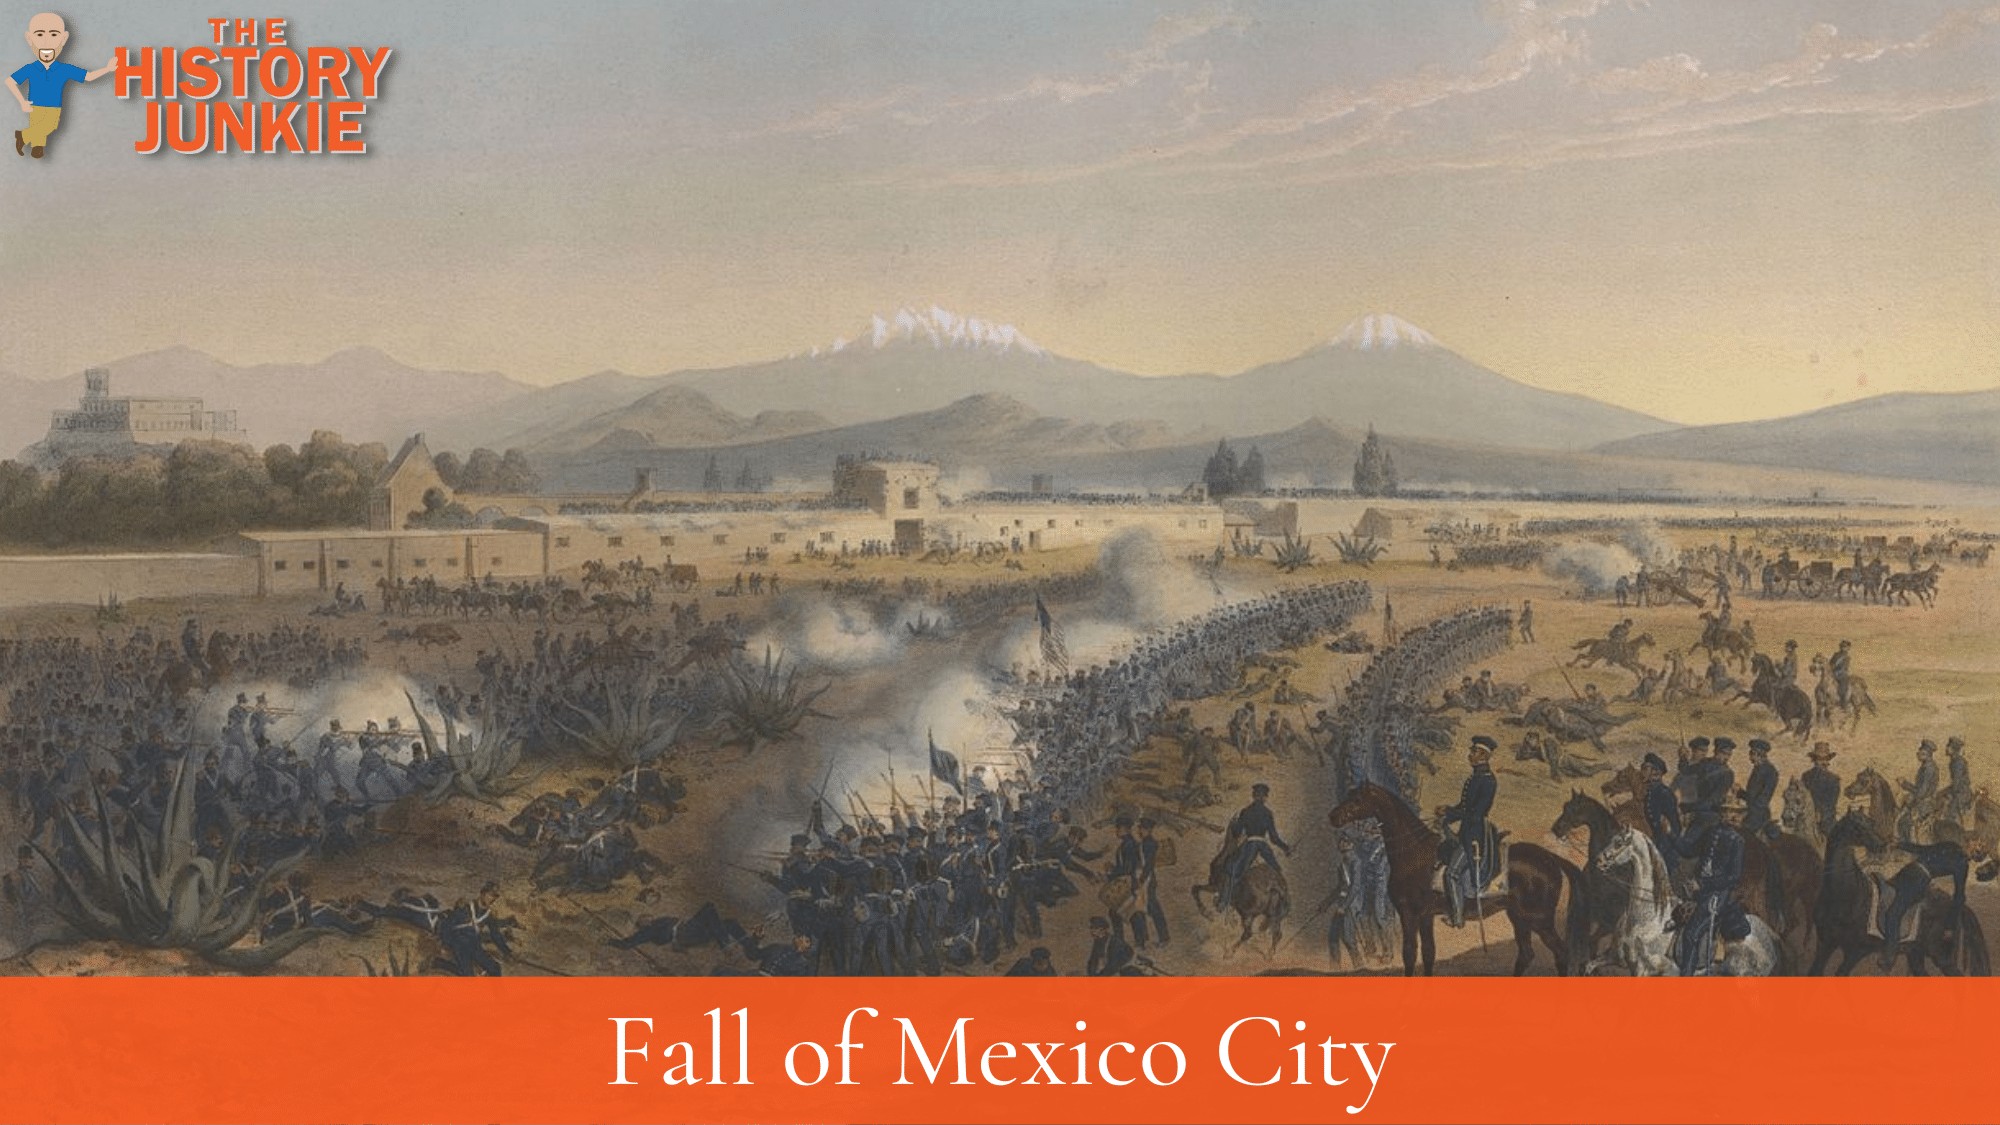 Fall of Mexico City during the Mexican-American War